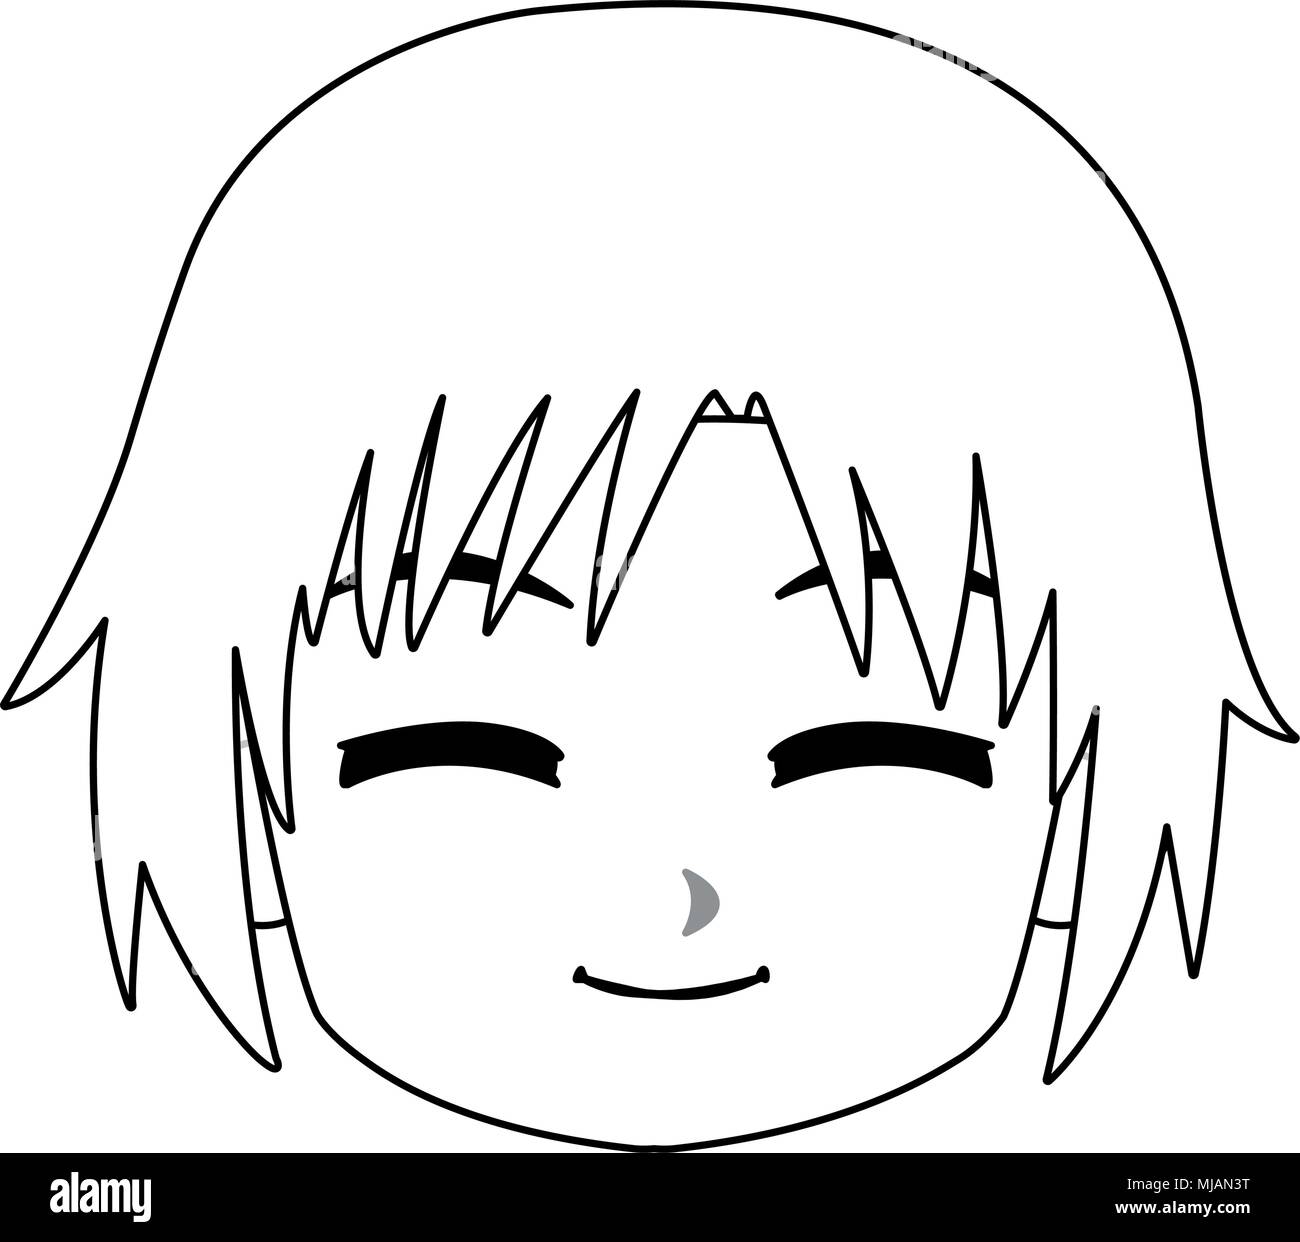 Two eyes clipart black and white anime  ClipArt Best  ClipArt Best